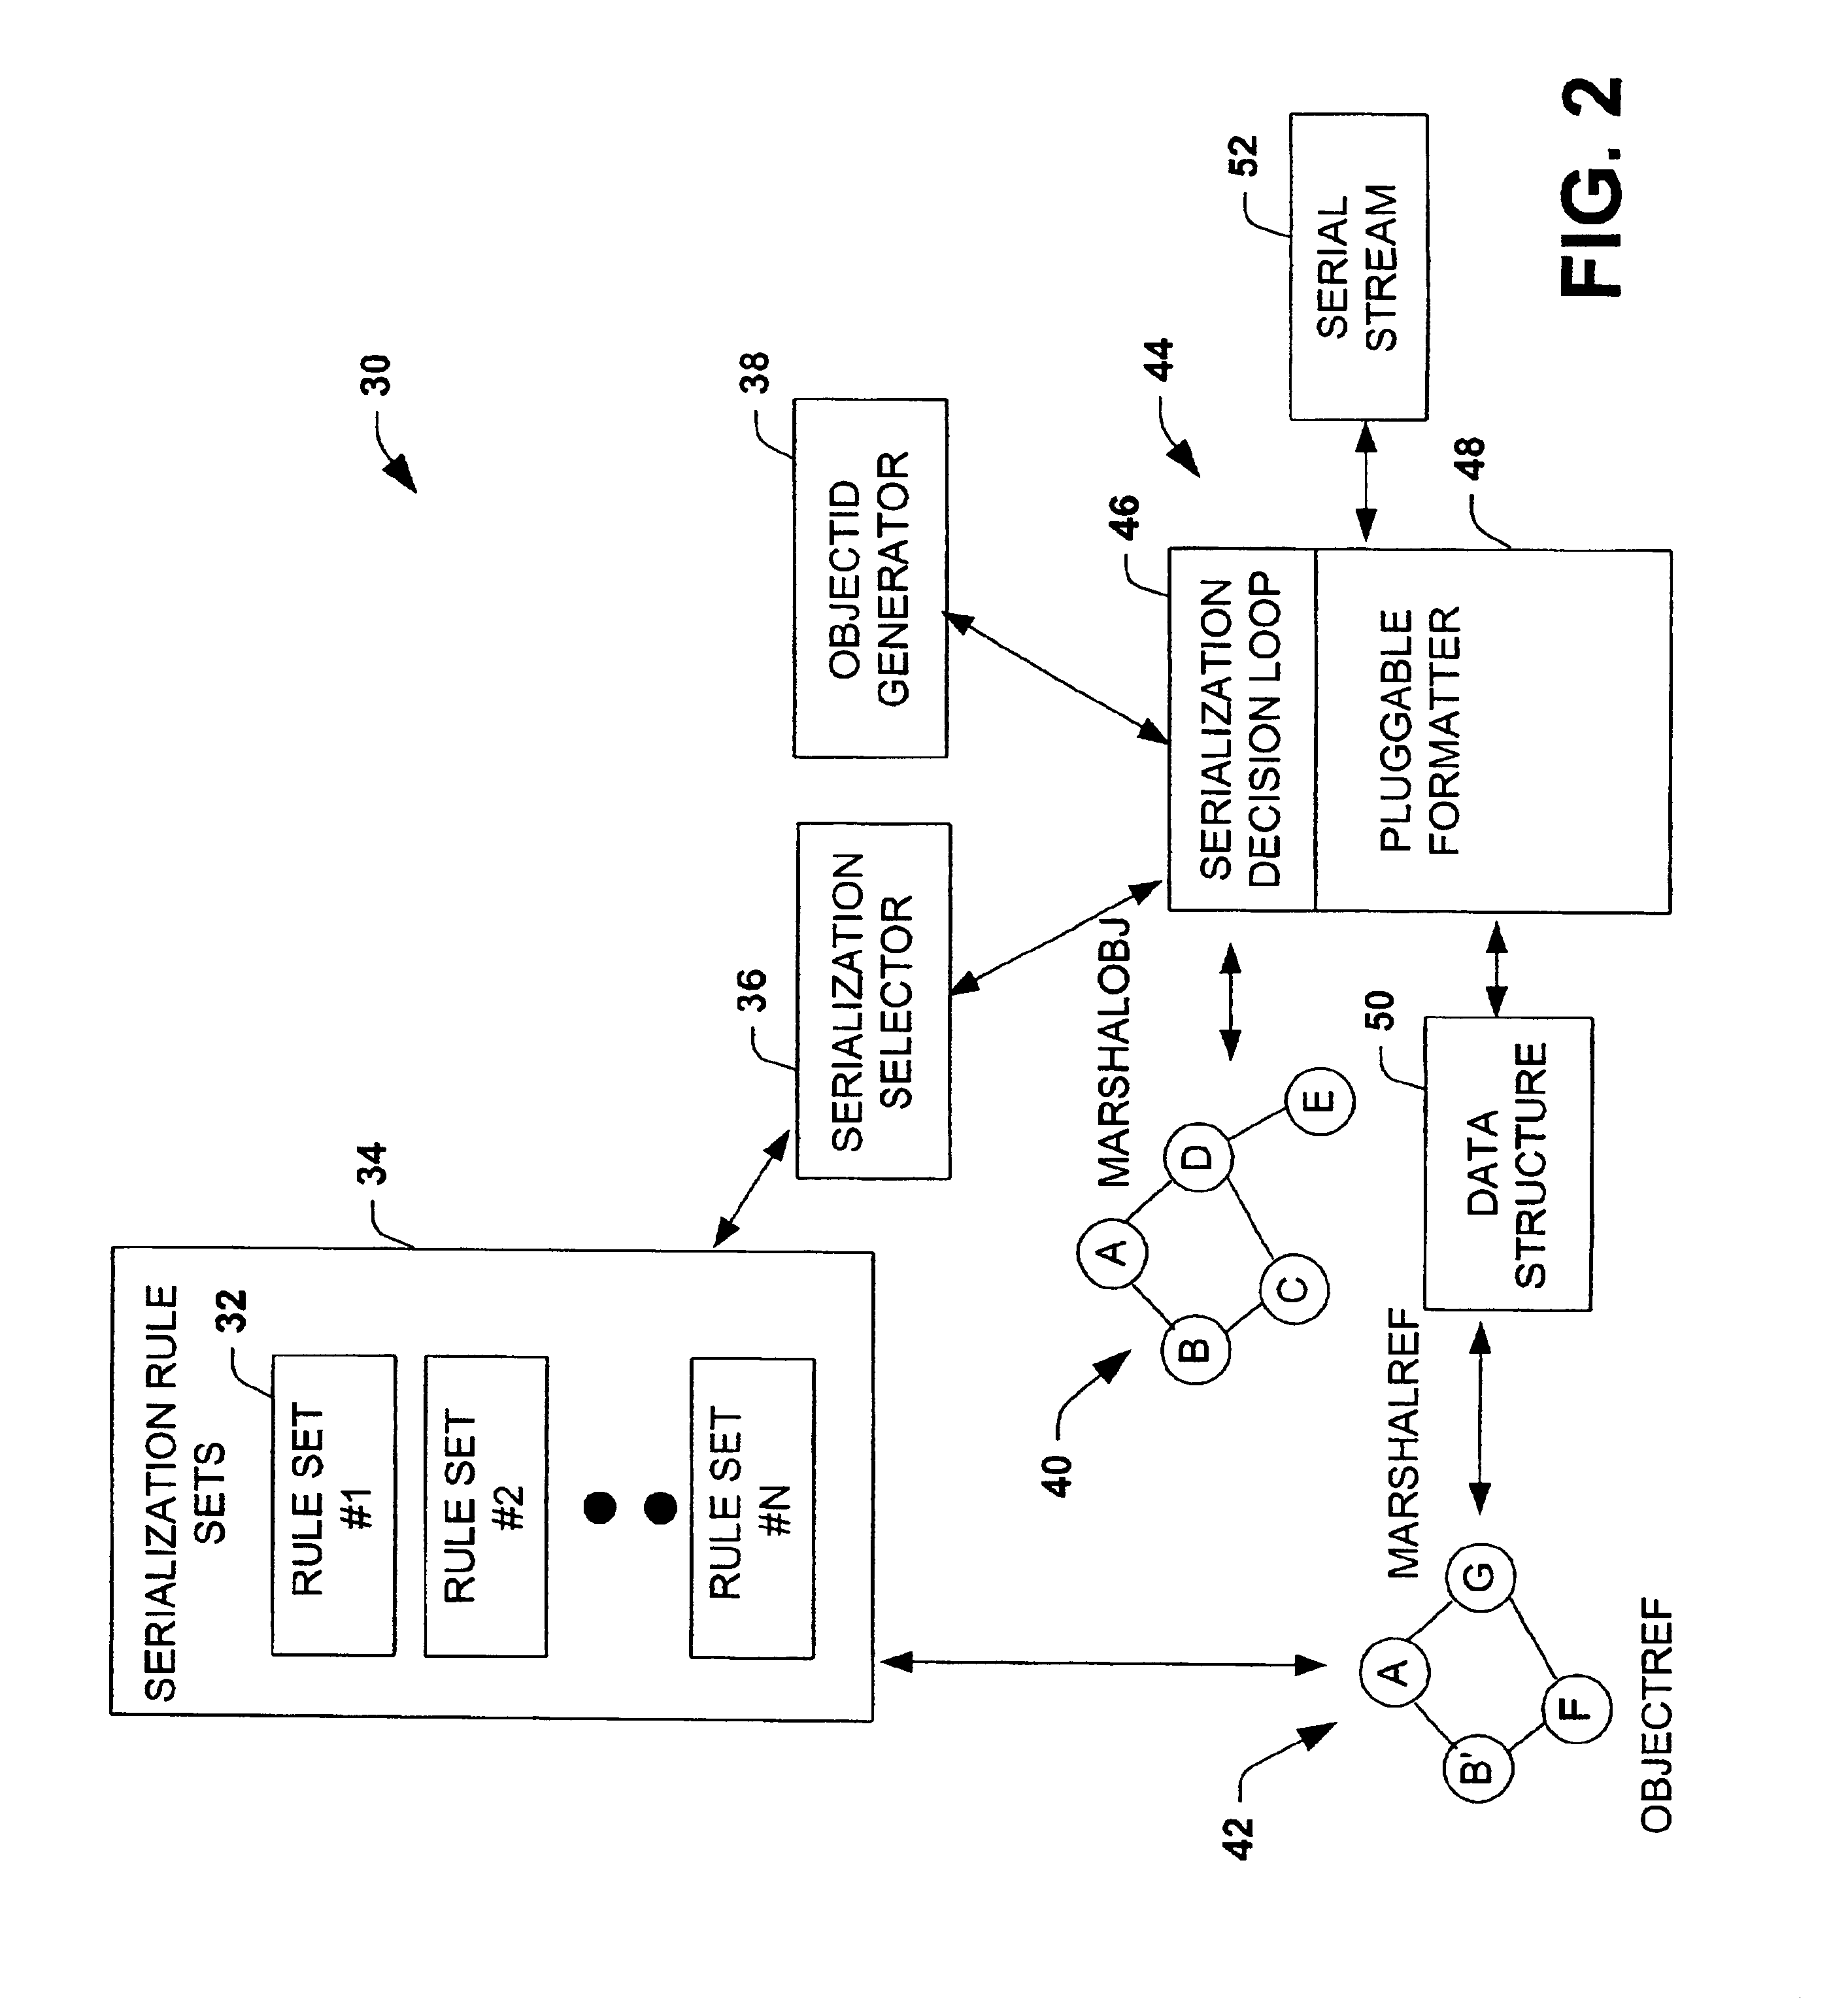 Architecture and method for serialization and deserialization of objects